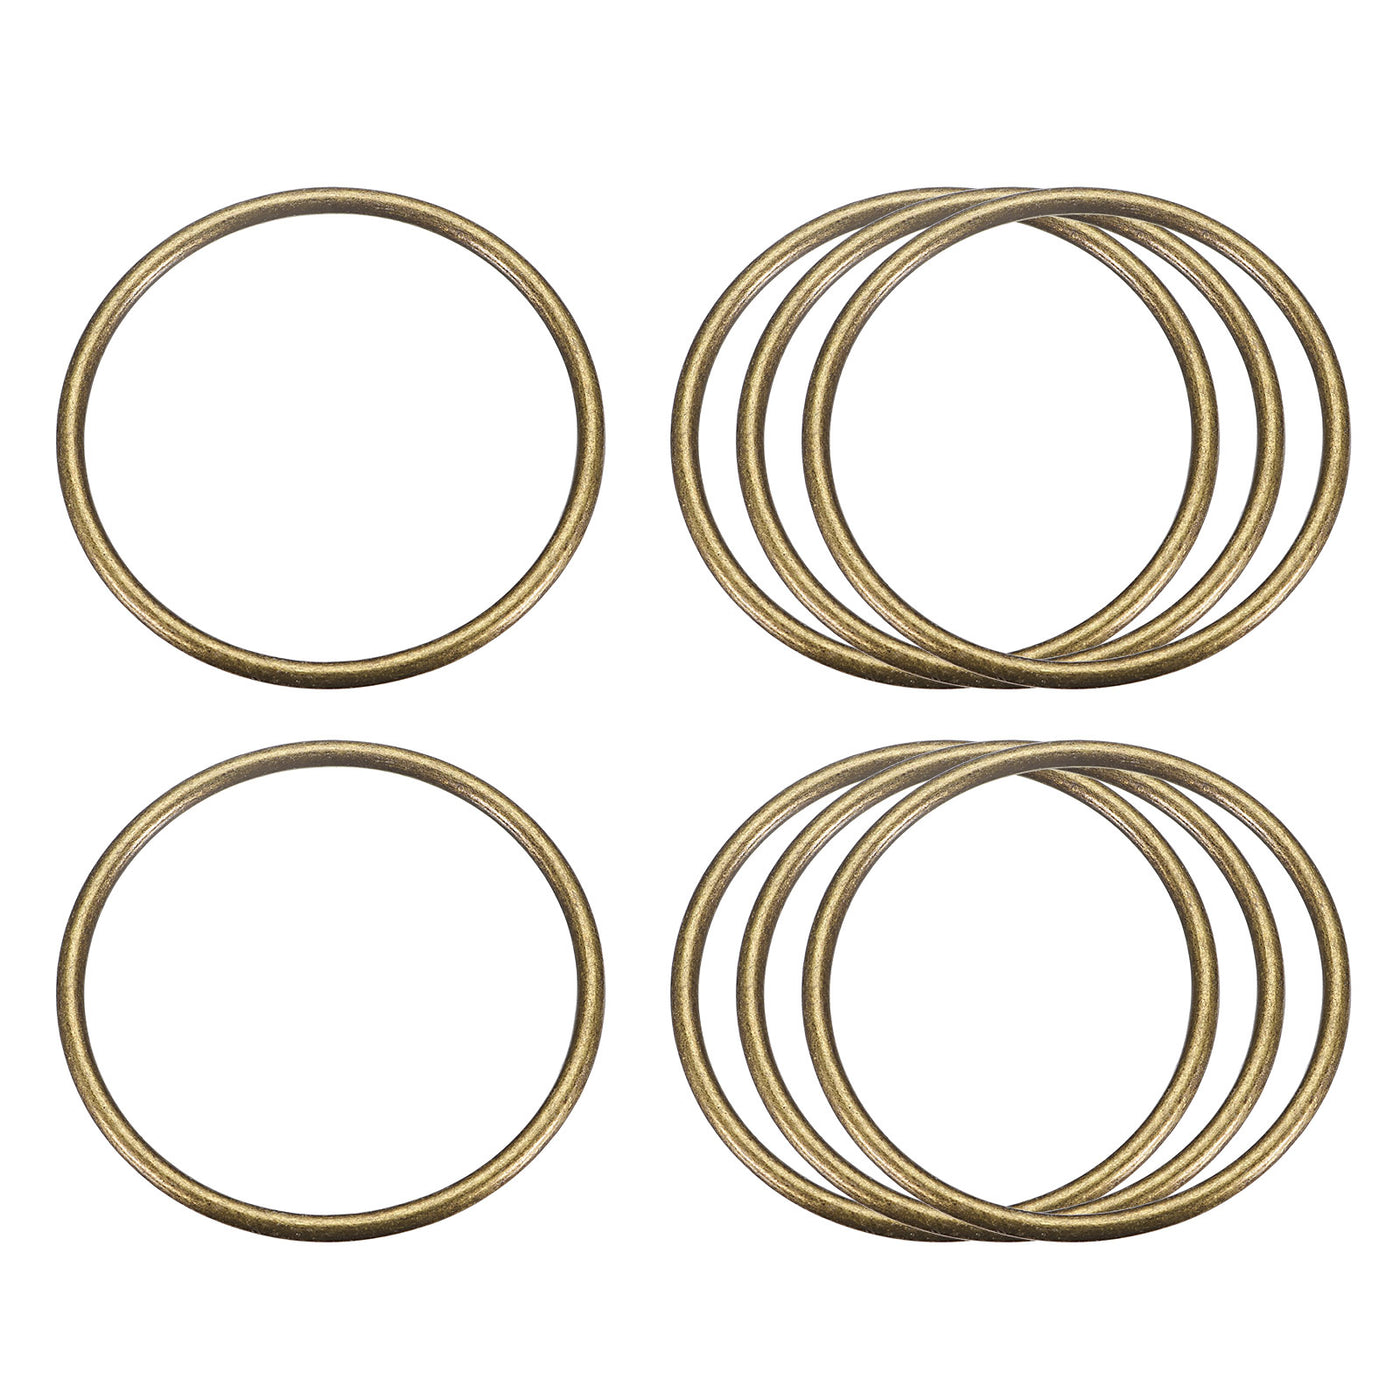 uxcell Uxcell Metal O Rings, 8pcs 50mm(1.97") ID 3mm Thick Welded O-Ringe, Bronze Tone